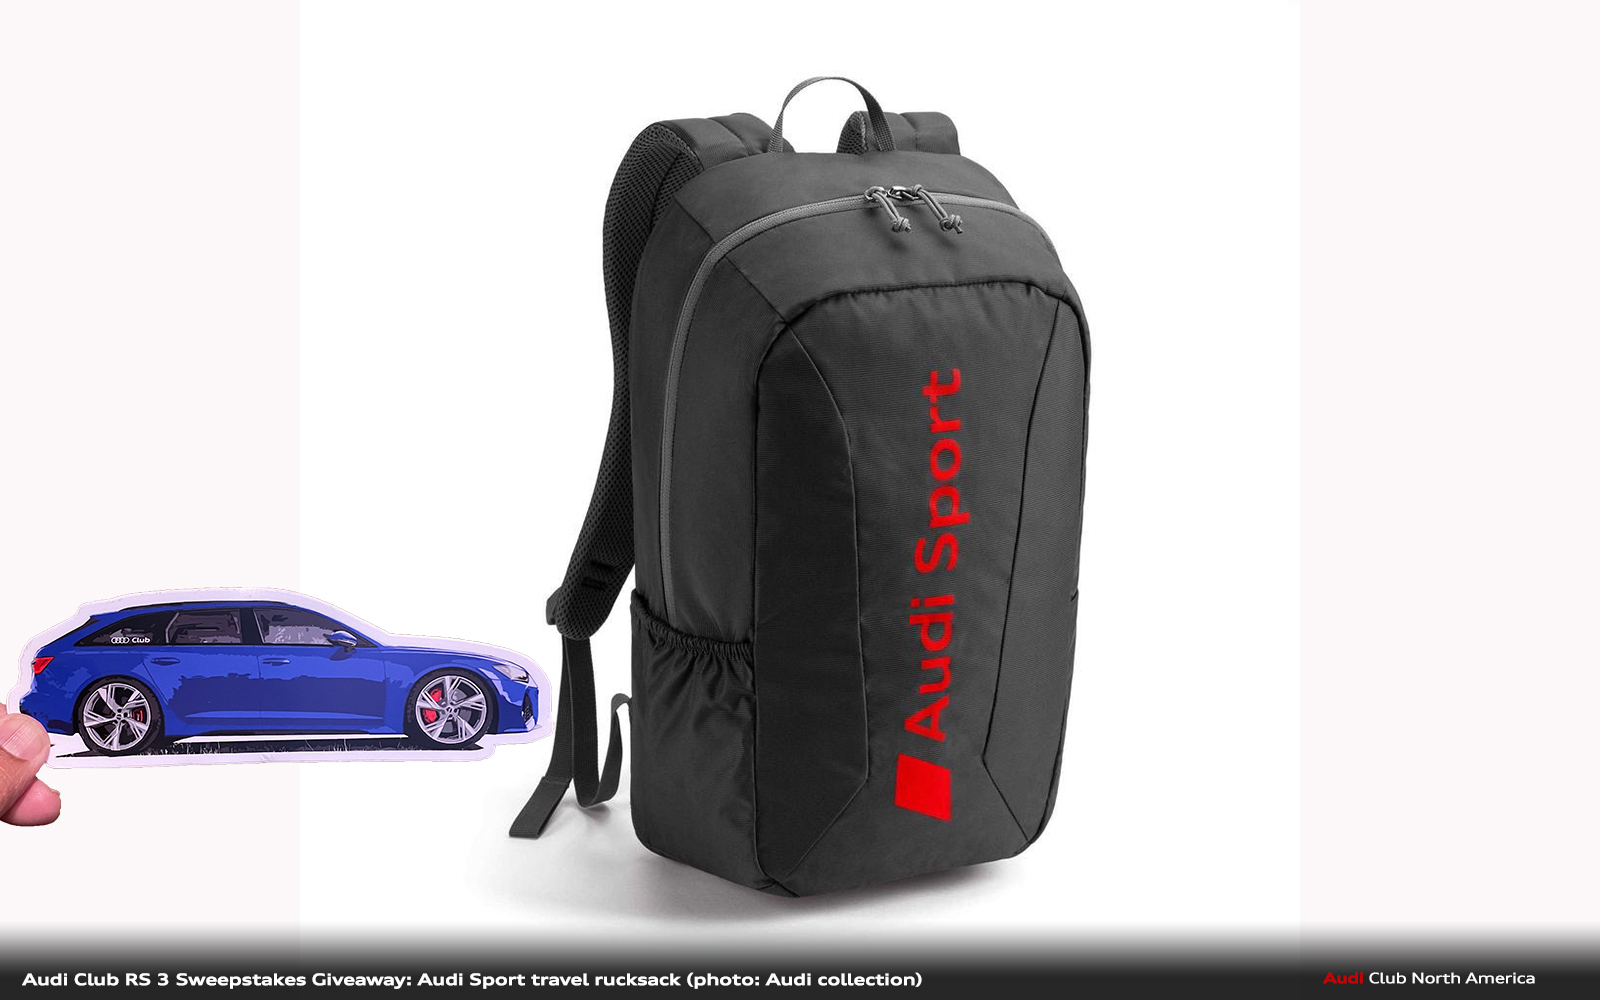 Everyone RS Rucksack Gets Audi This Wins 6 North Sport and Audi America Club Audi an Travel One - Tribute Decal!